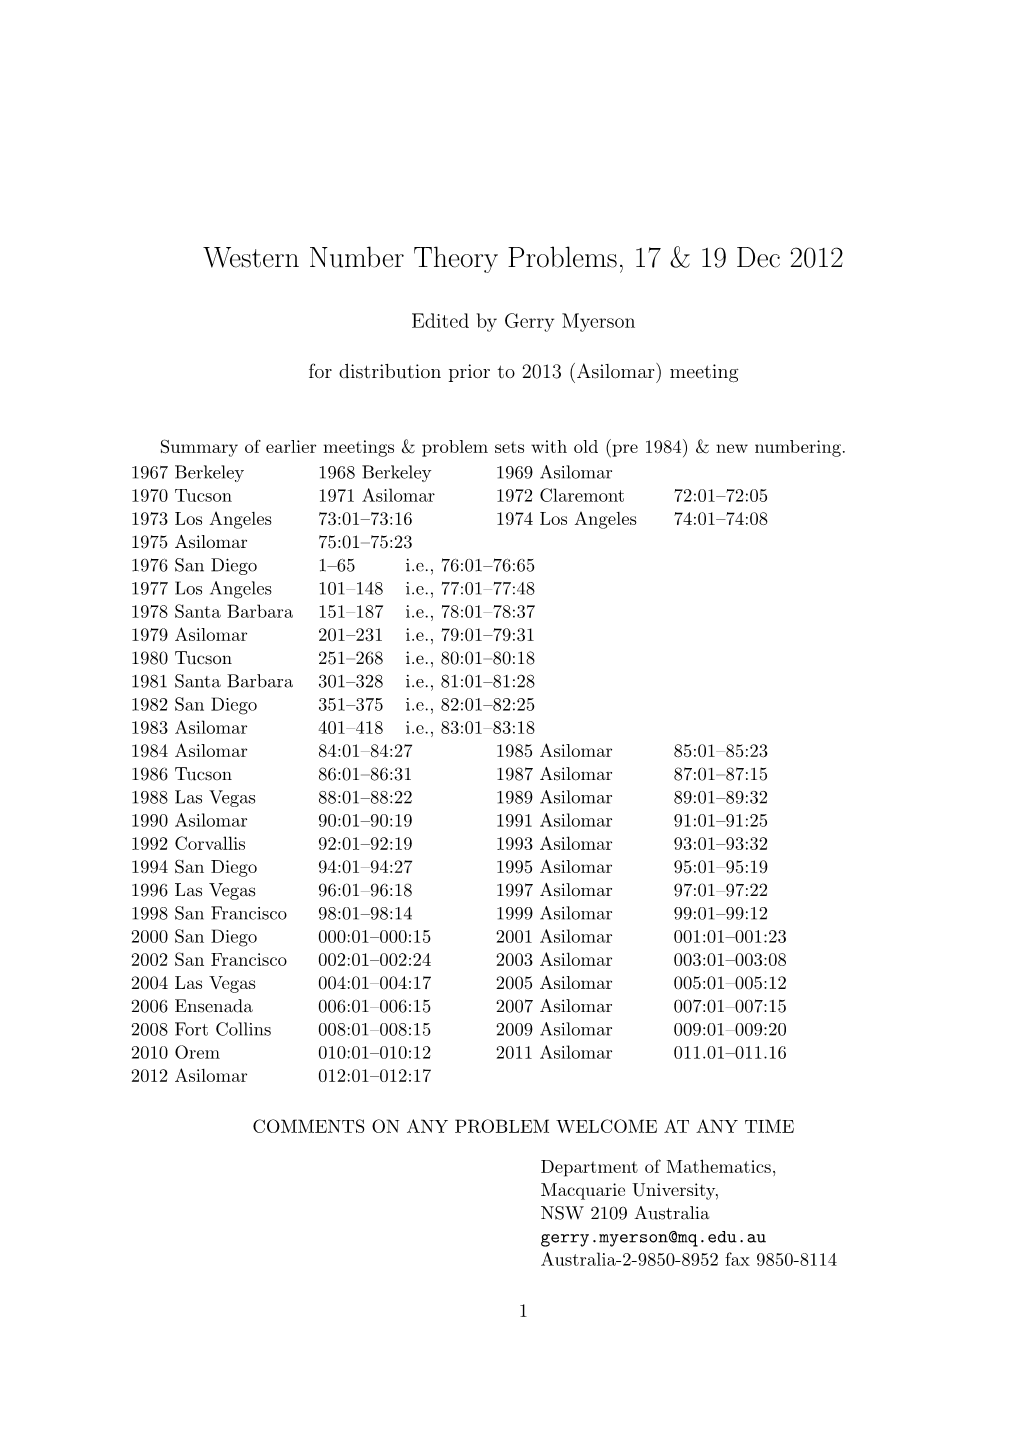 Western Number Theory Problems, 17 & 19 Dec 2012